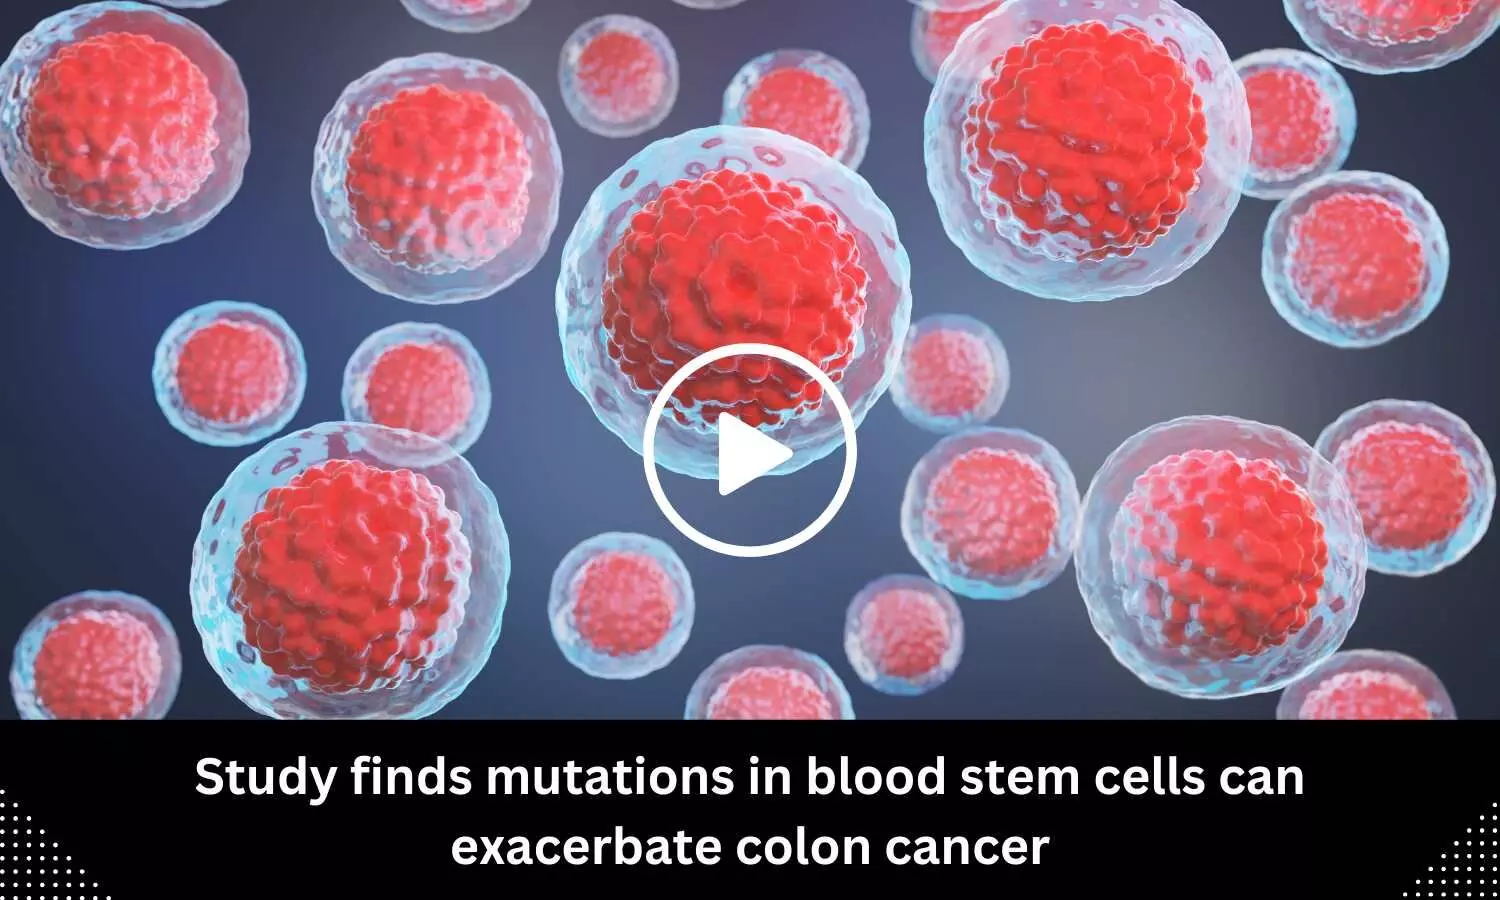 Study finds mutations in blood stem cells can exacerbate colon cancer